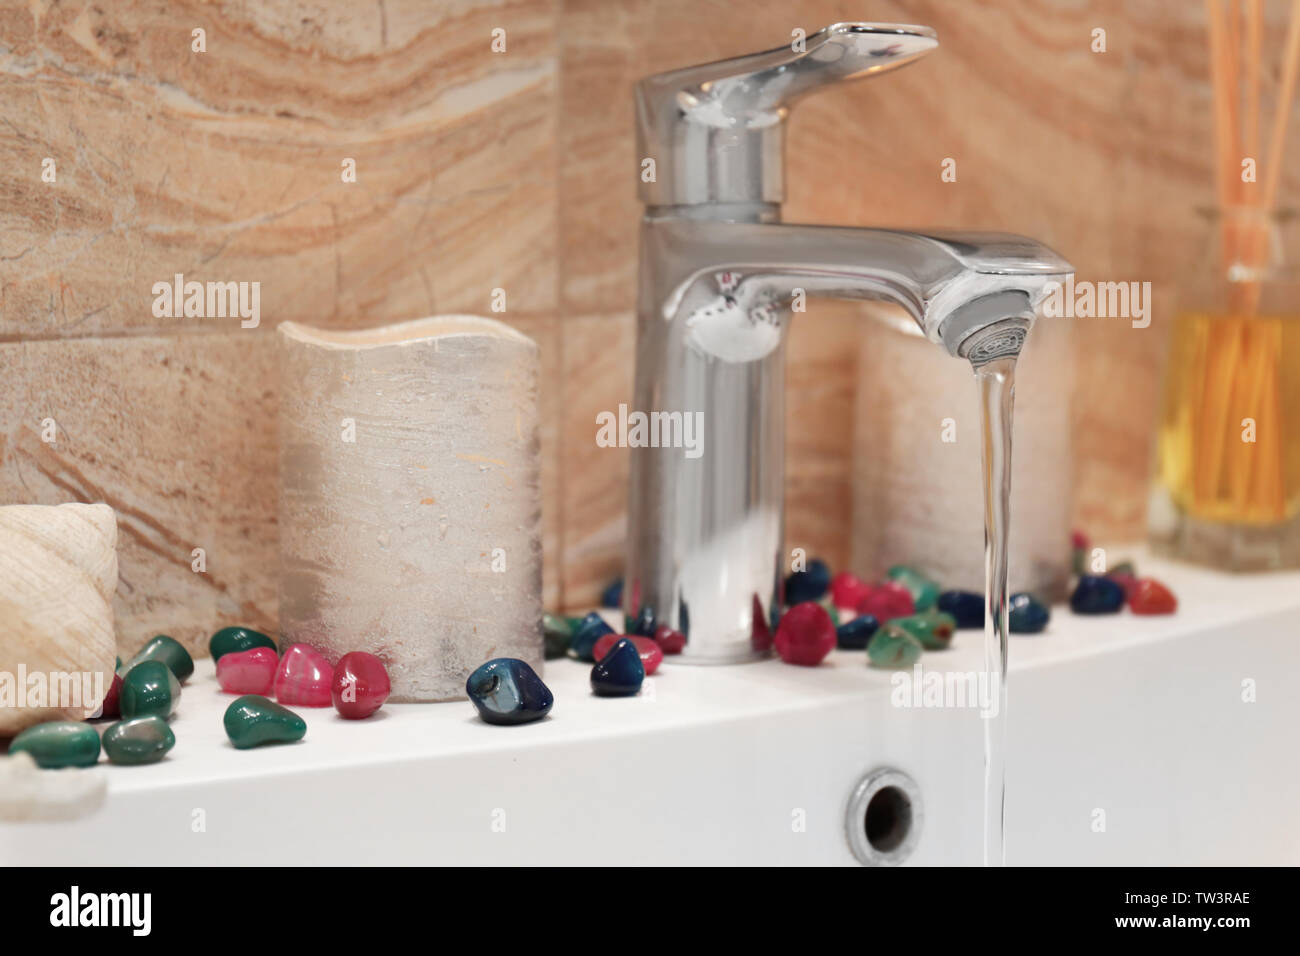 Clean Sink And Faucet In Modern Spa Center Stock Photo 256395734